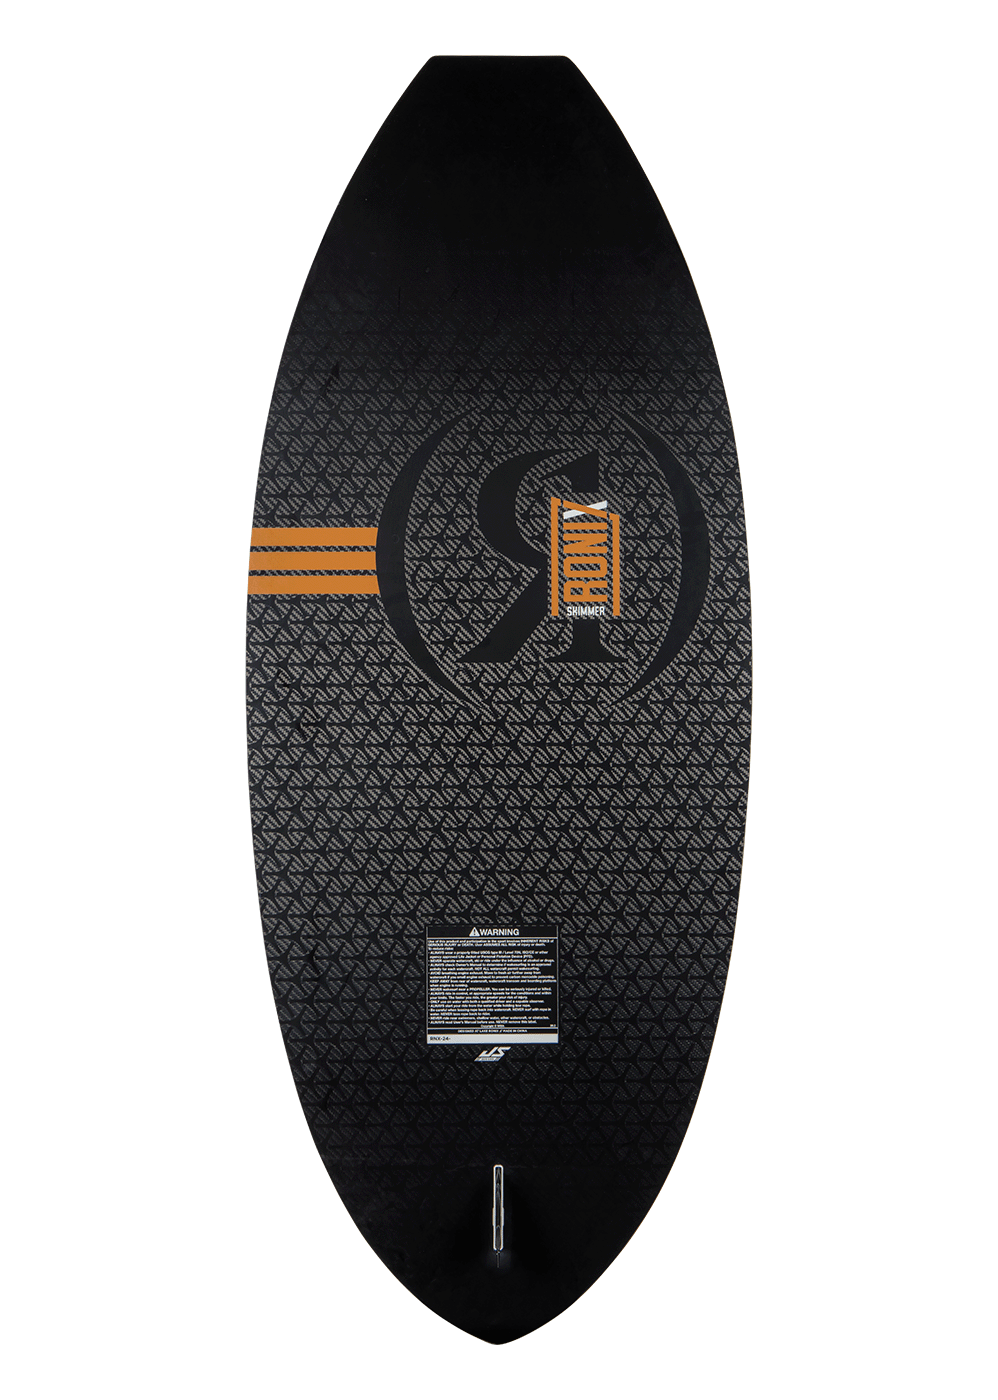 RONIX CARB AIR CORE TYPE 8:12